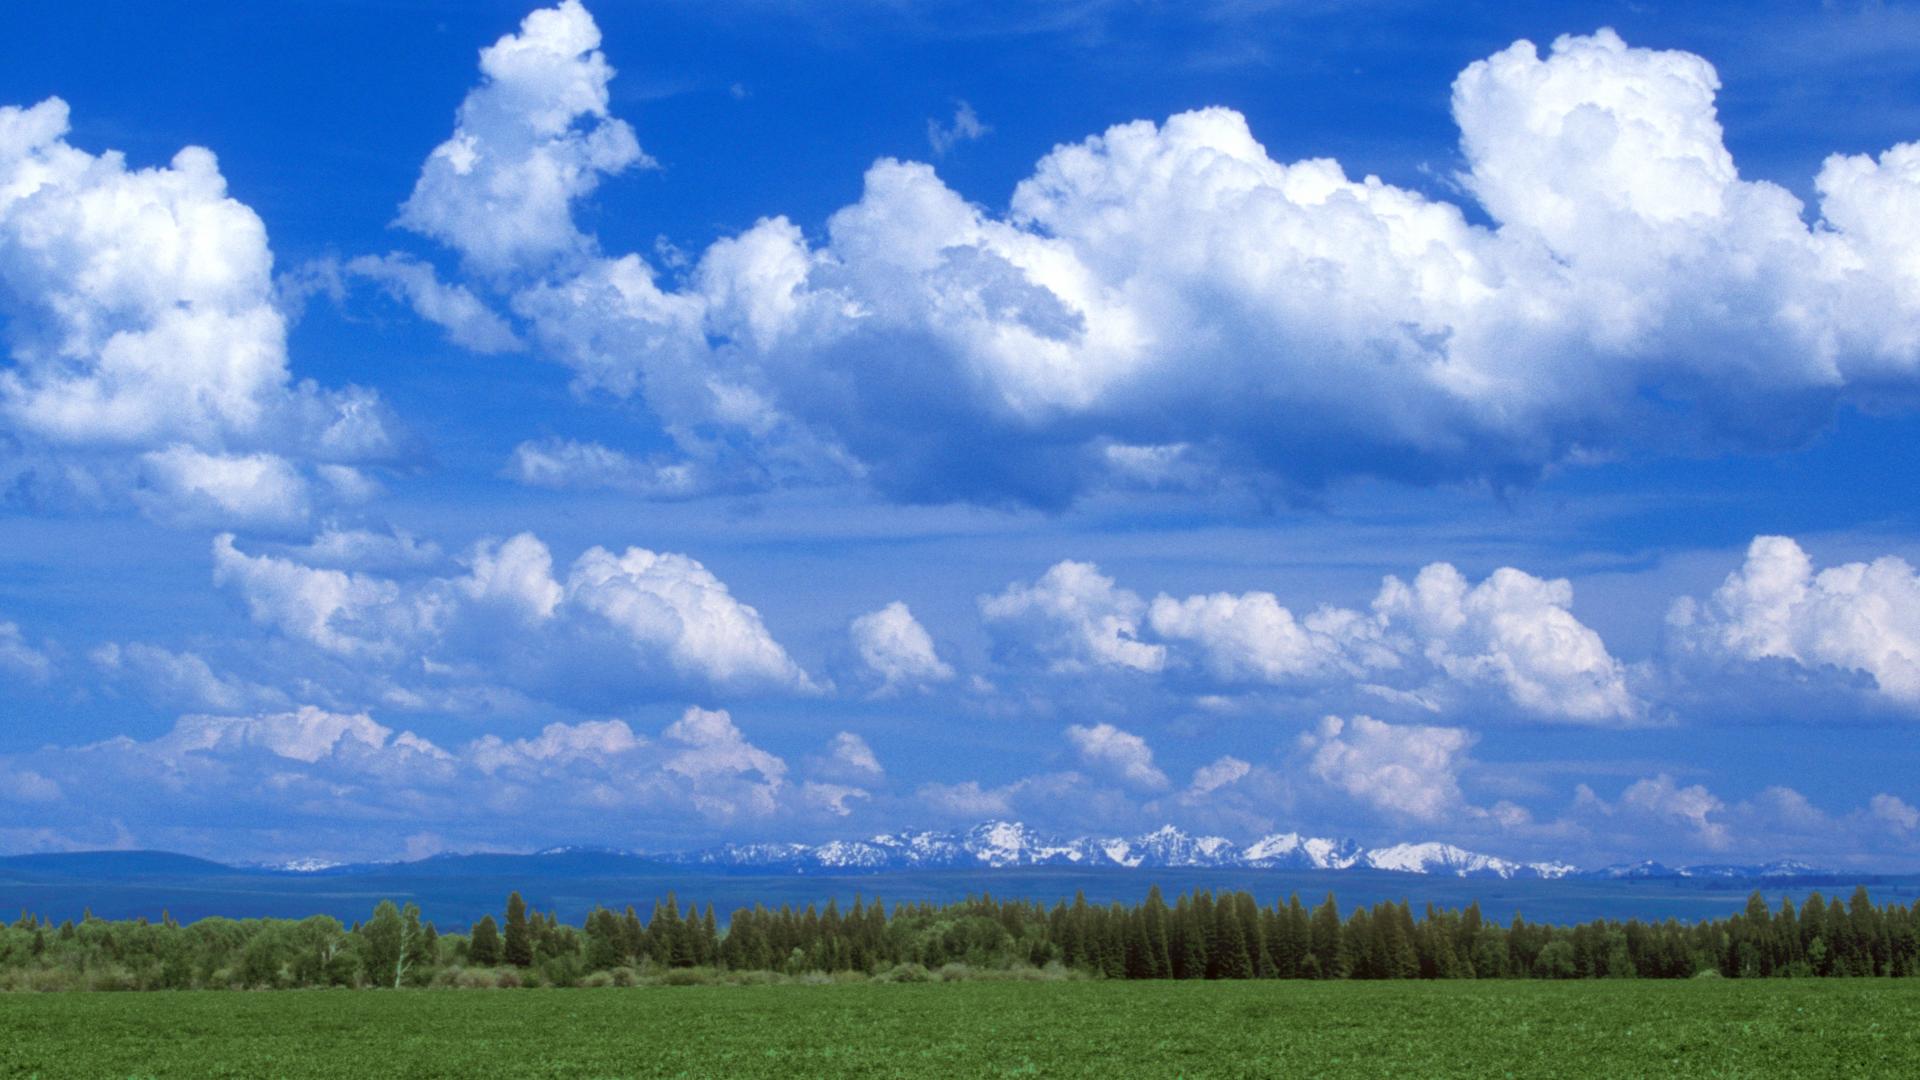 Background Oregon Background Joseph Partly Sky Cloudy Wallpaper